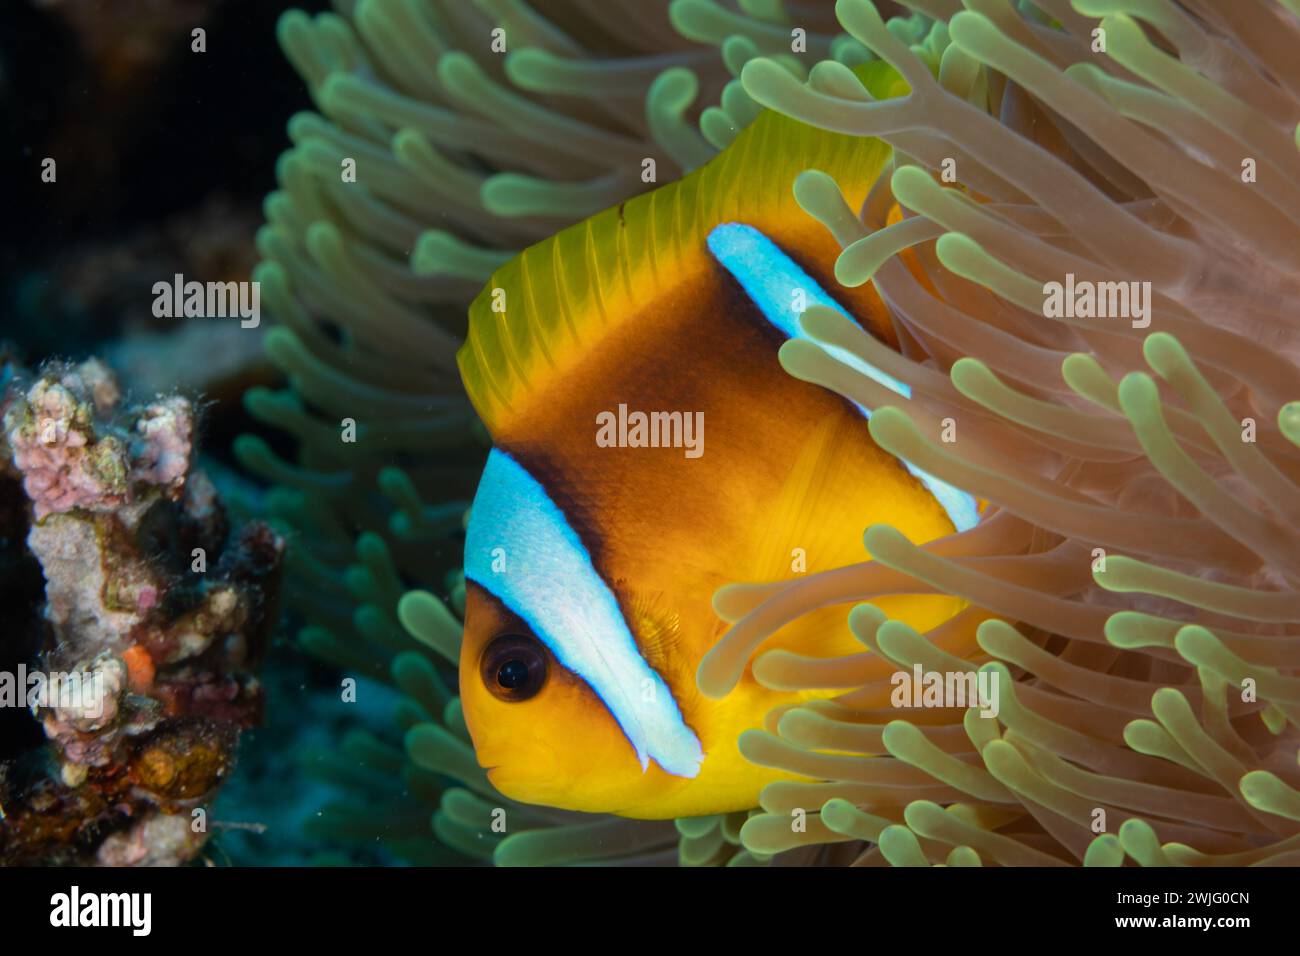 Clown Anemone Fish, amphiprion ocellaris, hides in colorful yellow Sea Anemone, actiniaria, with long tentacles on coral reef Stock Photo